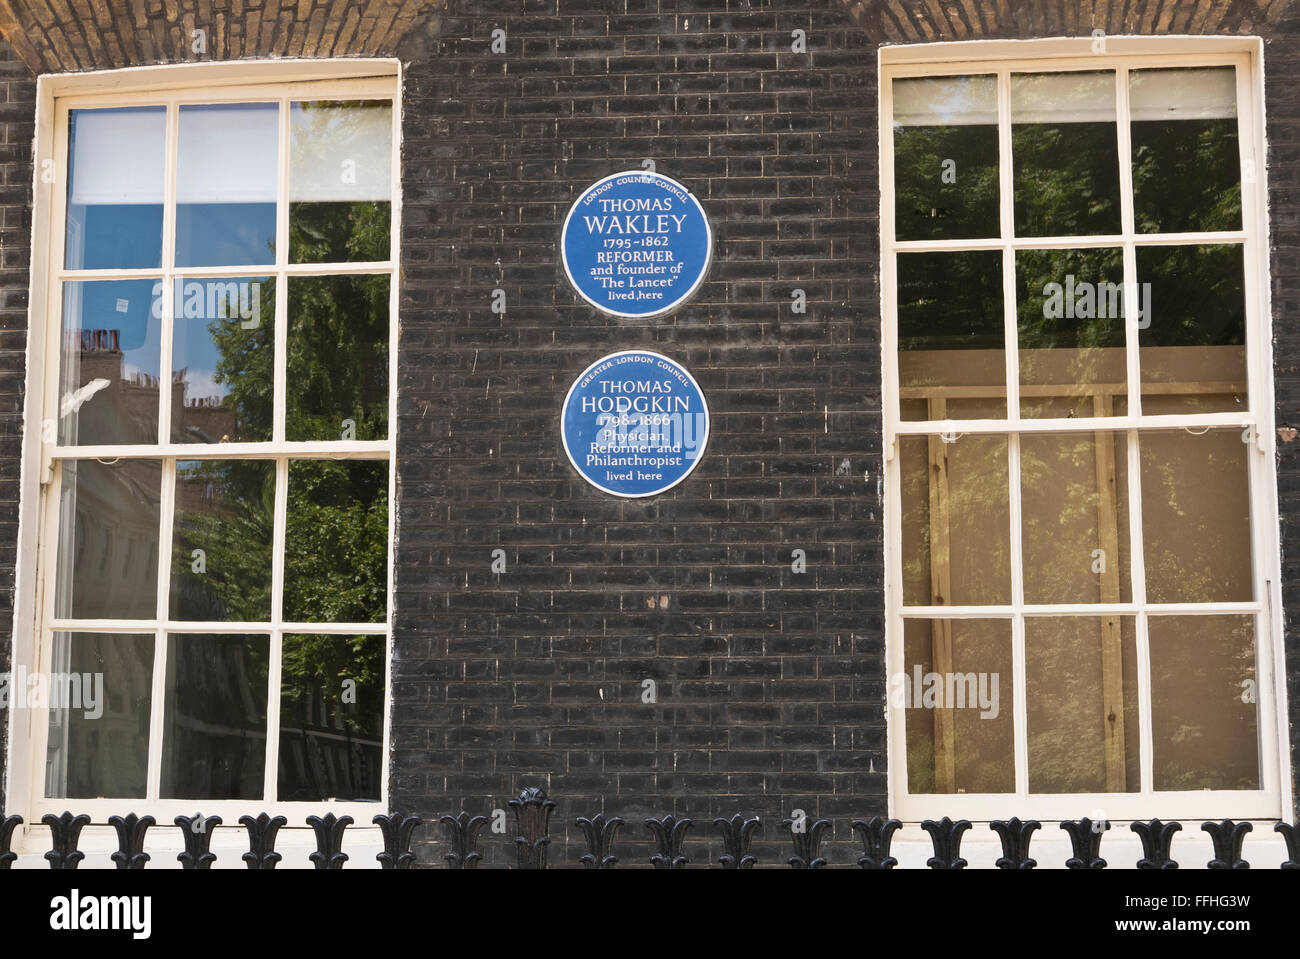 Two commemorative blue plaques for Thomas Wakley and Thomas Hodgkin on display on a wall in London, United Kingdom. Stock Photo